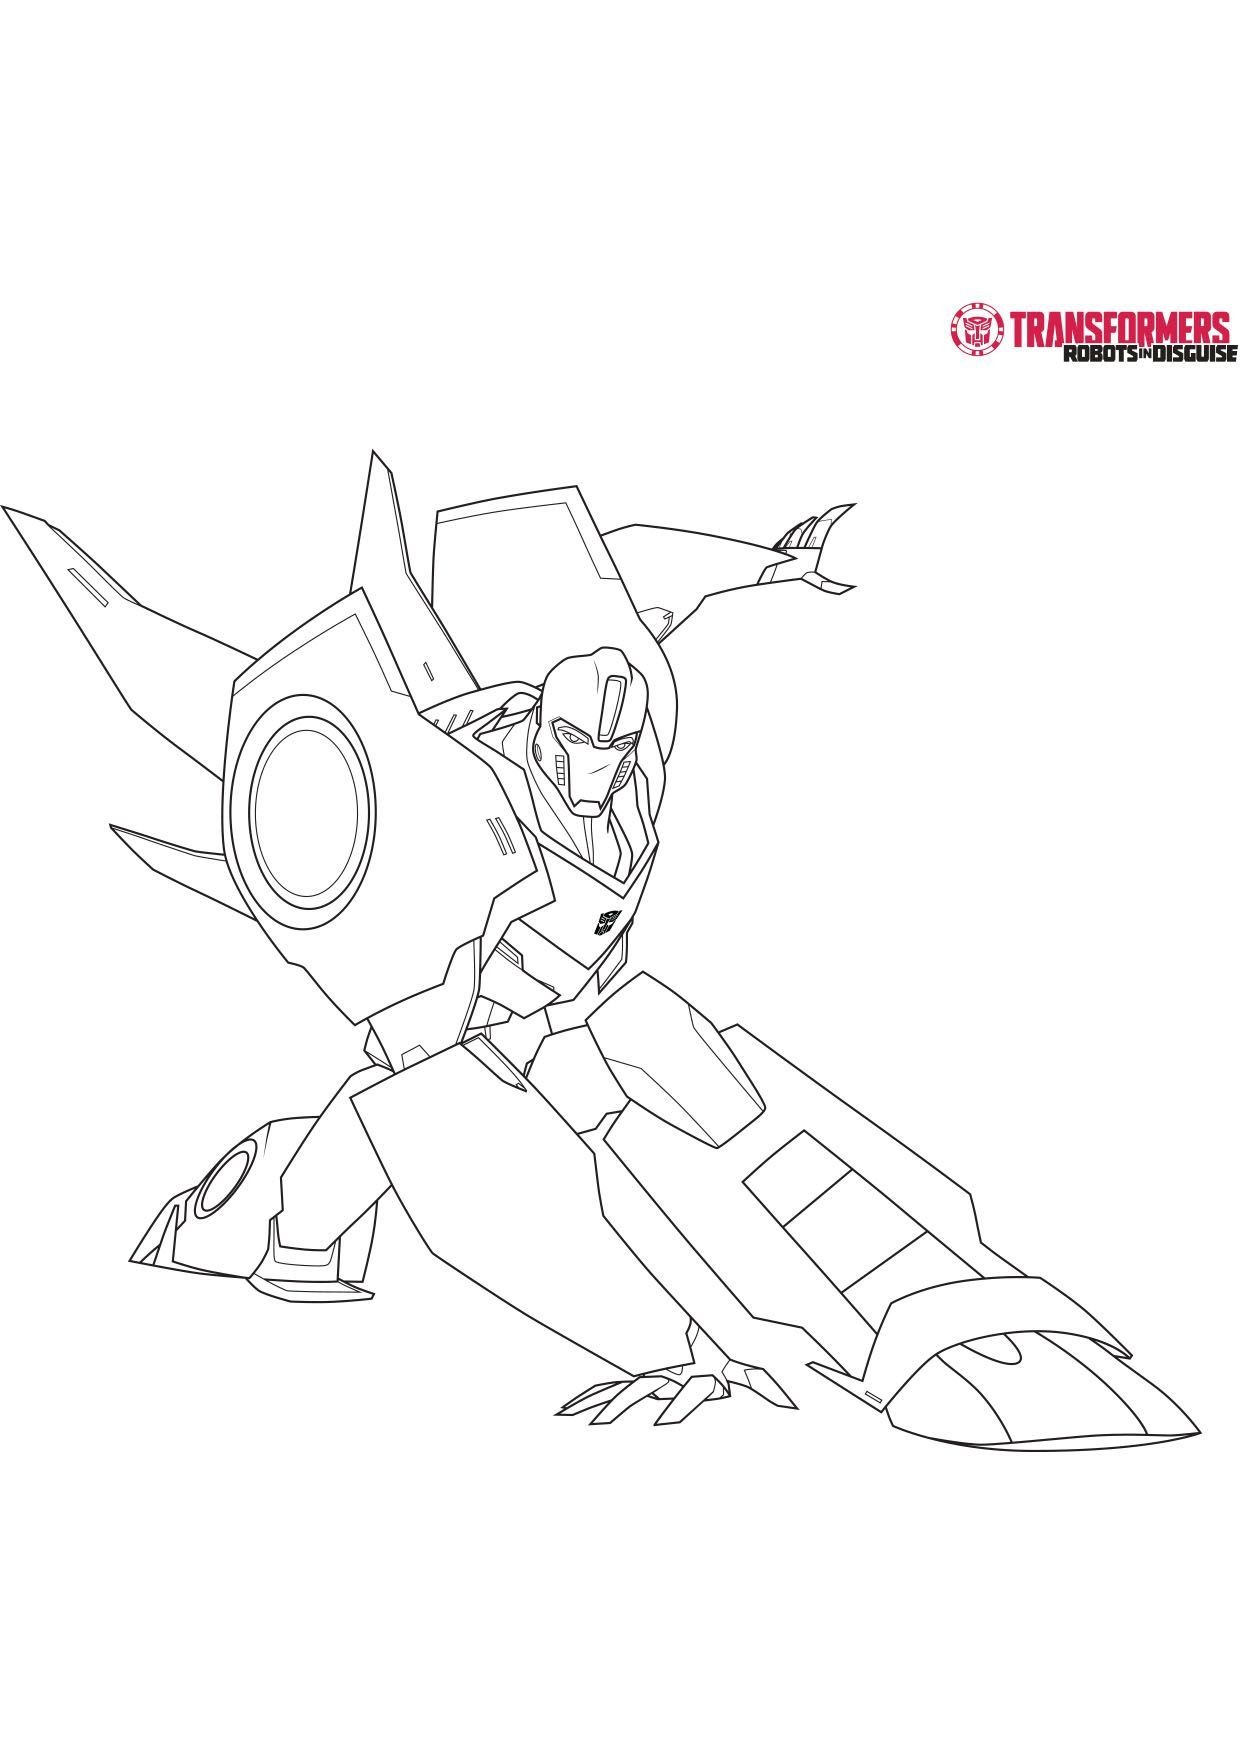 Bumblebee 5 - Coloriages Dessins Animes - Transformers Robots In Disguise à Coloriage Transformers Bumblebee